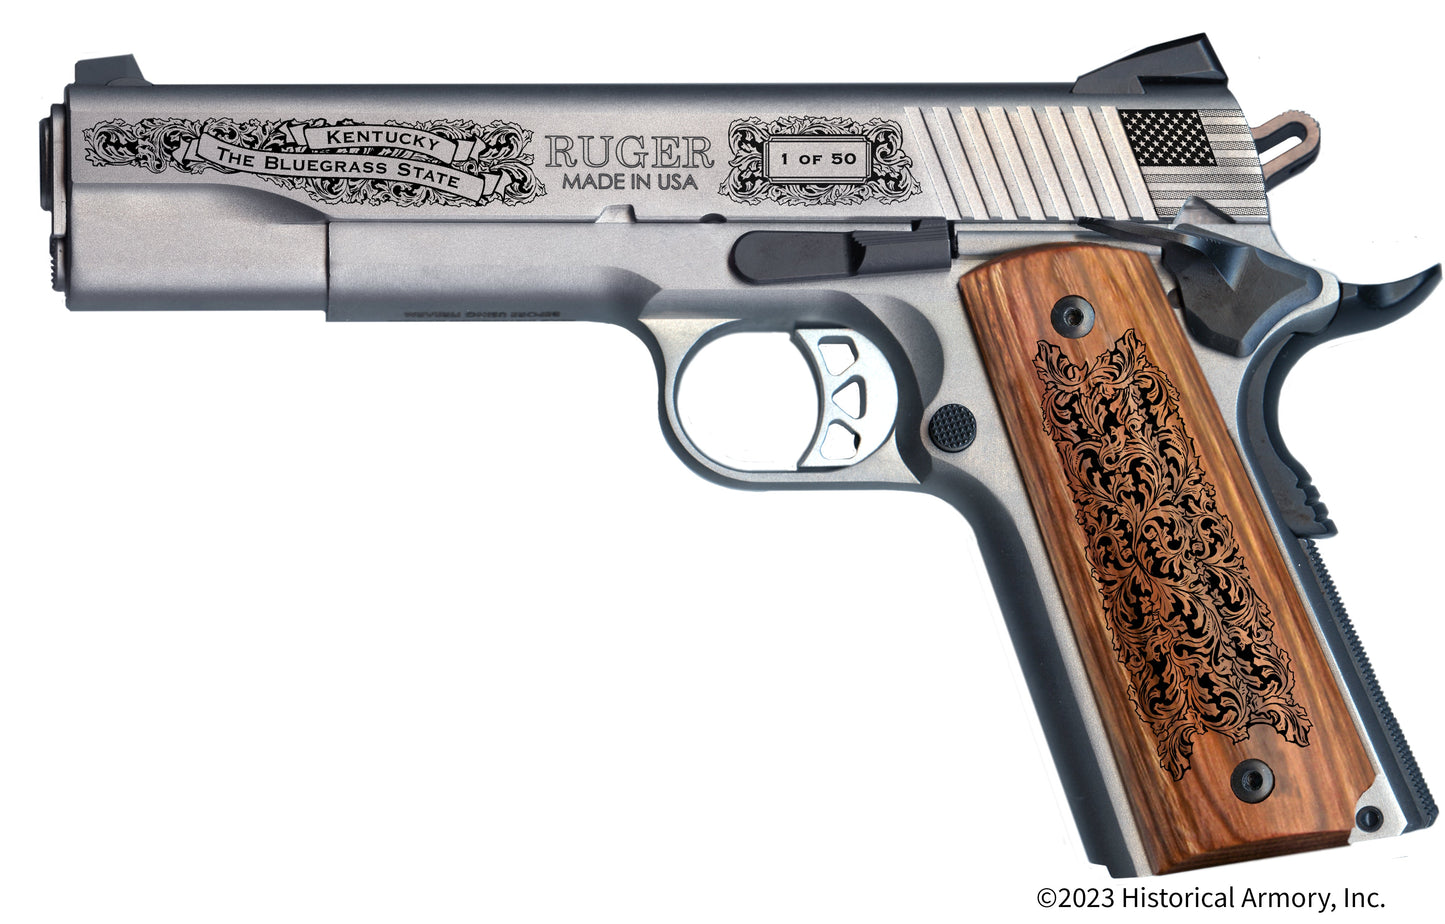 Robertson County Kentucky Engraved .45 Auto Ruger 1911